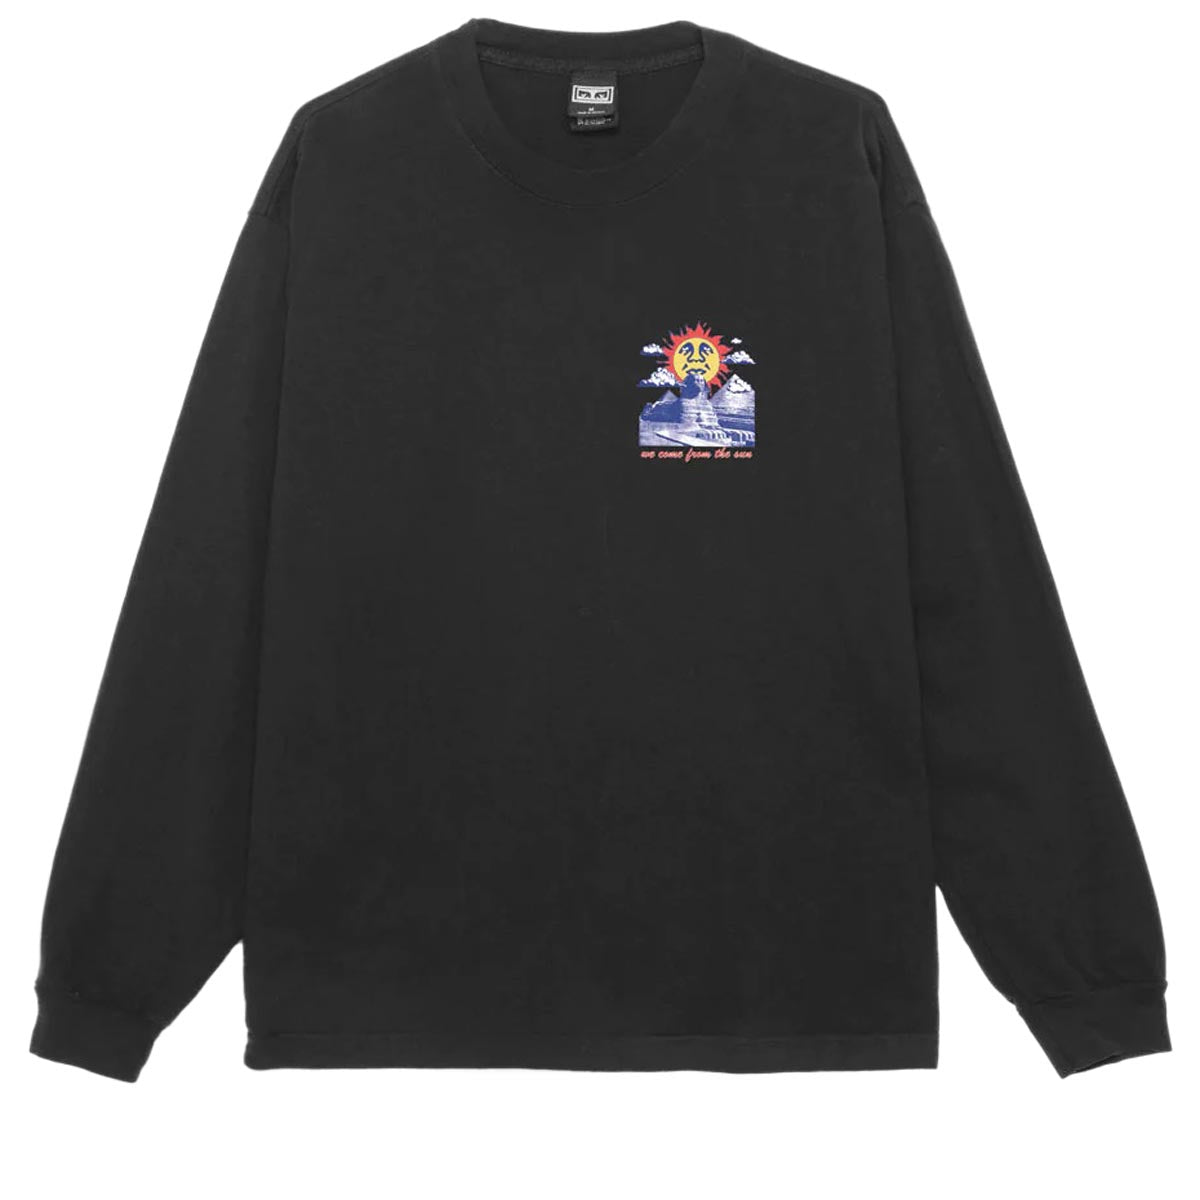 Obey We Come From The Sun Long Sleeve T-Shirt - Vintage Black image 2